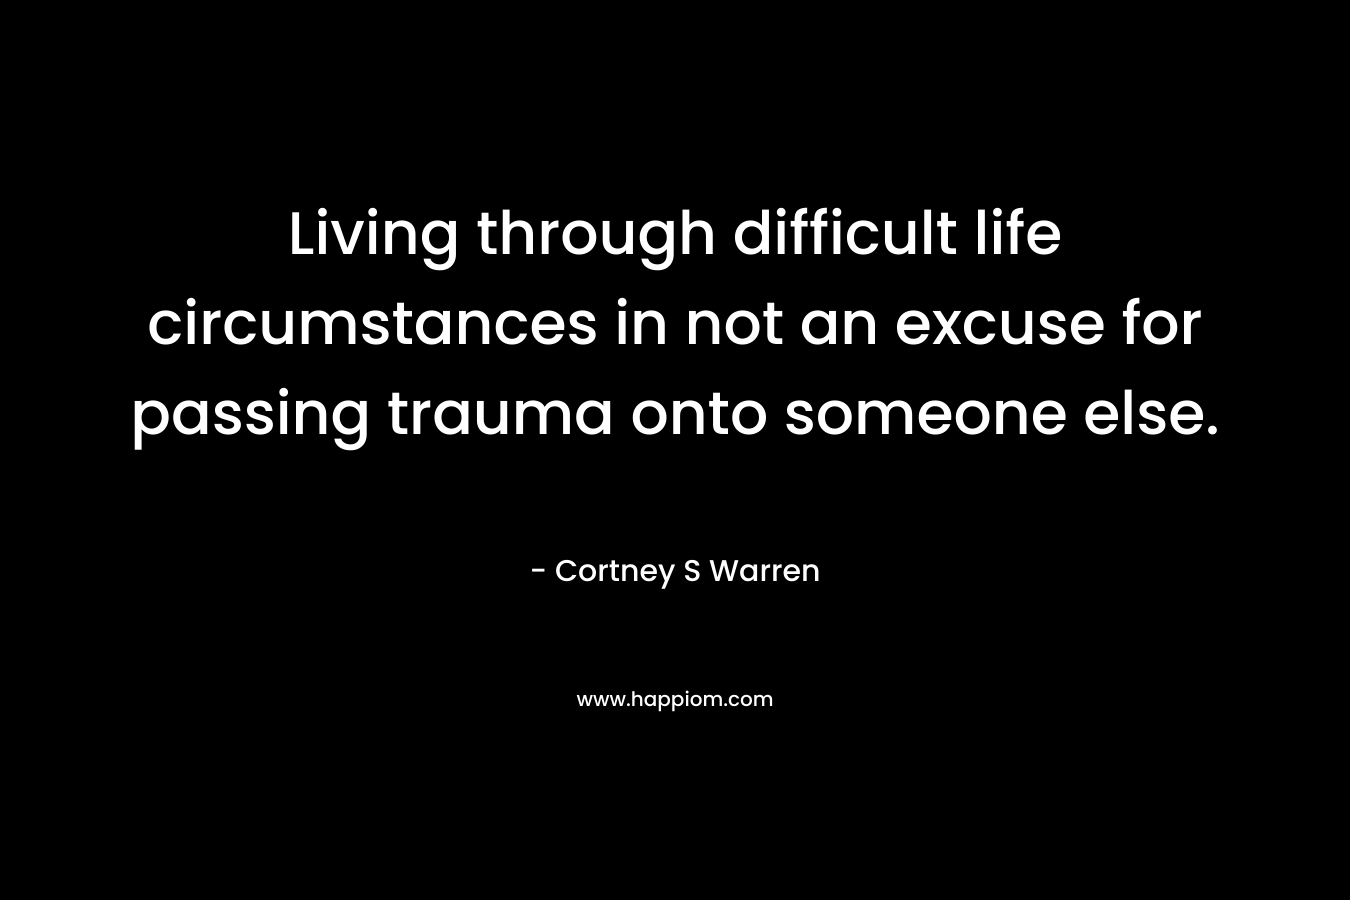 Living through difficult life circumstances in not an excuse for passing trauma onto someone else.